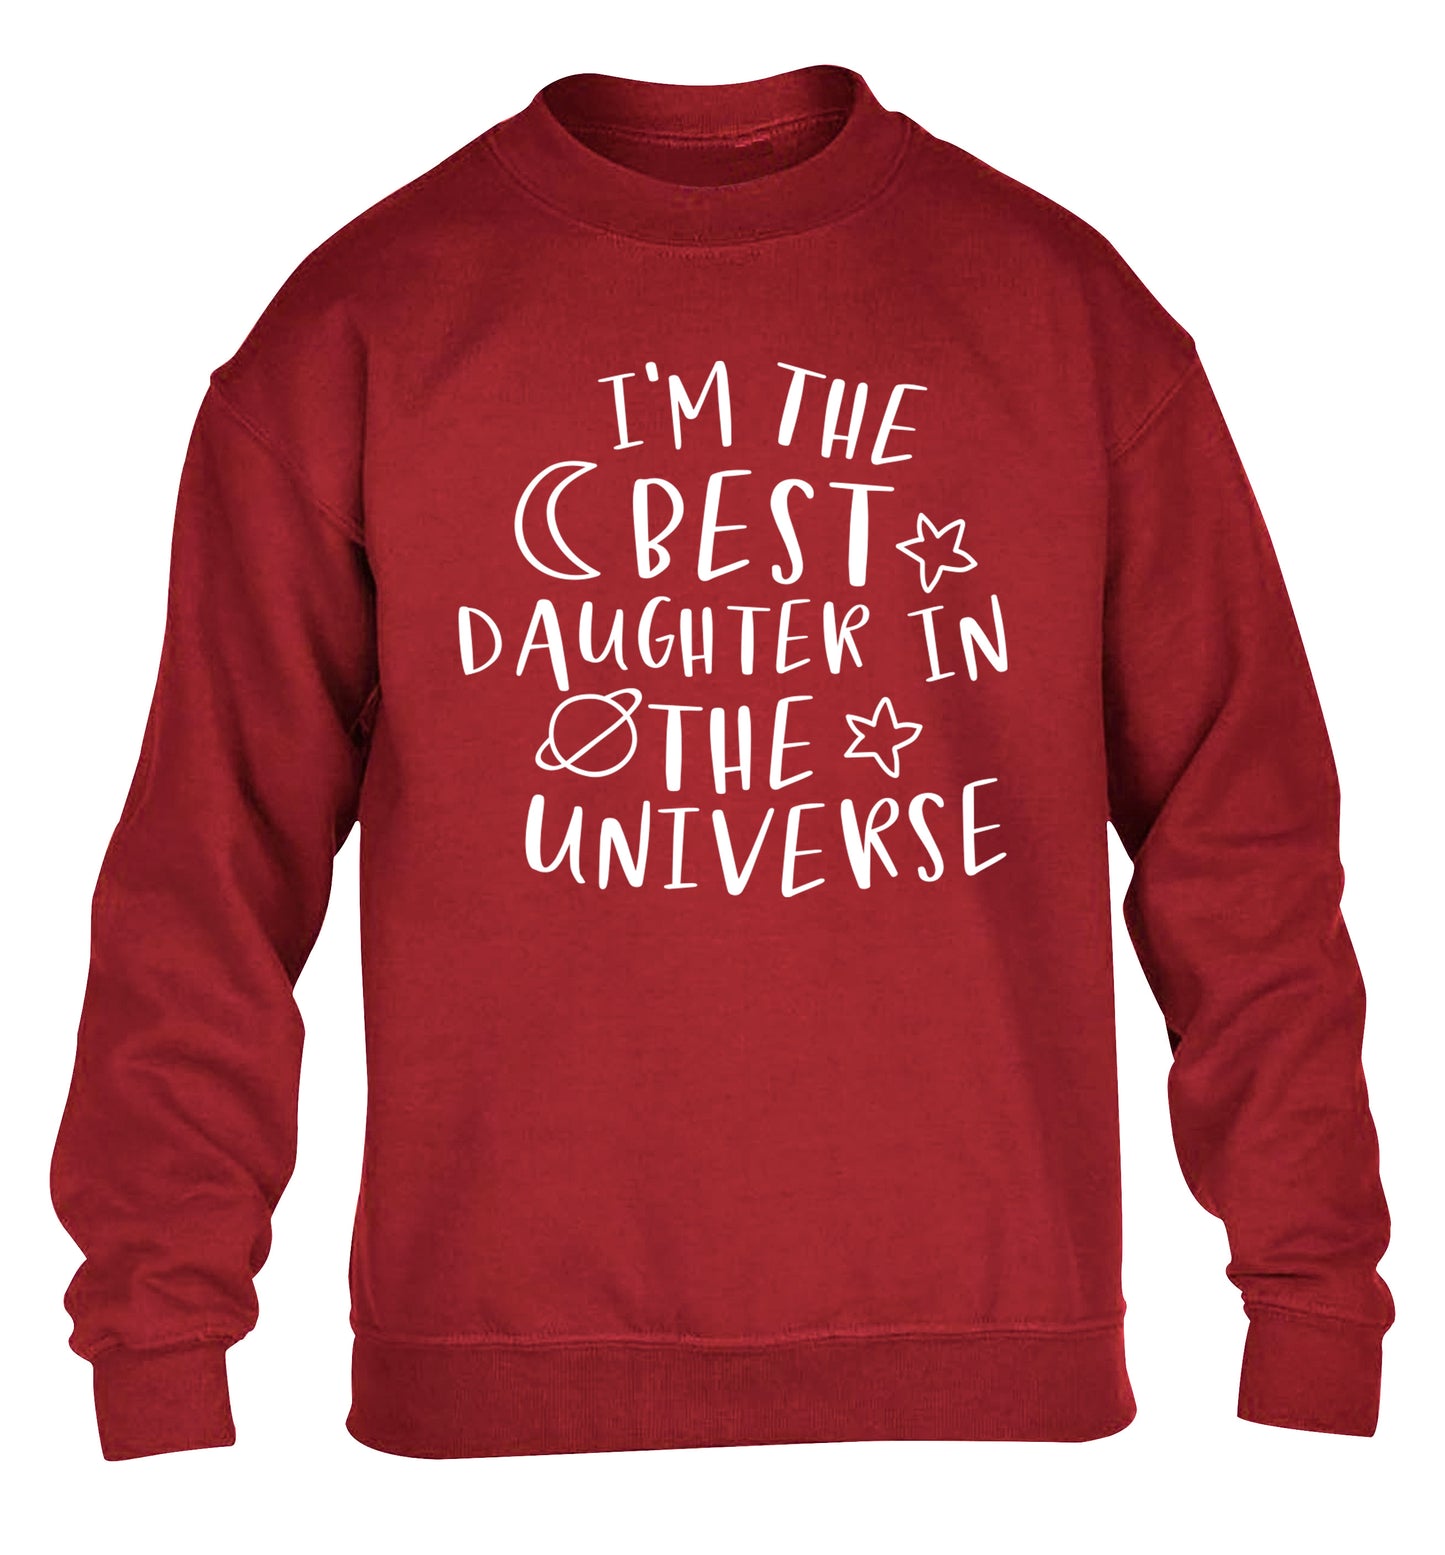 I'm the best daughter in the universe children's grey sweater 12-13 Years